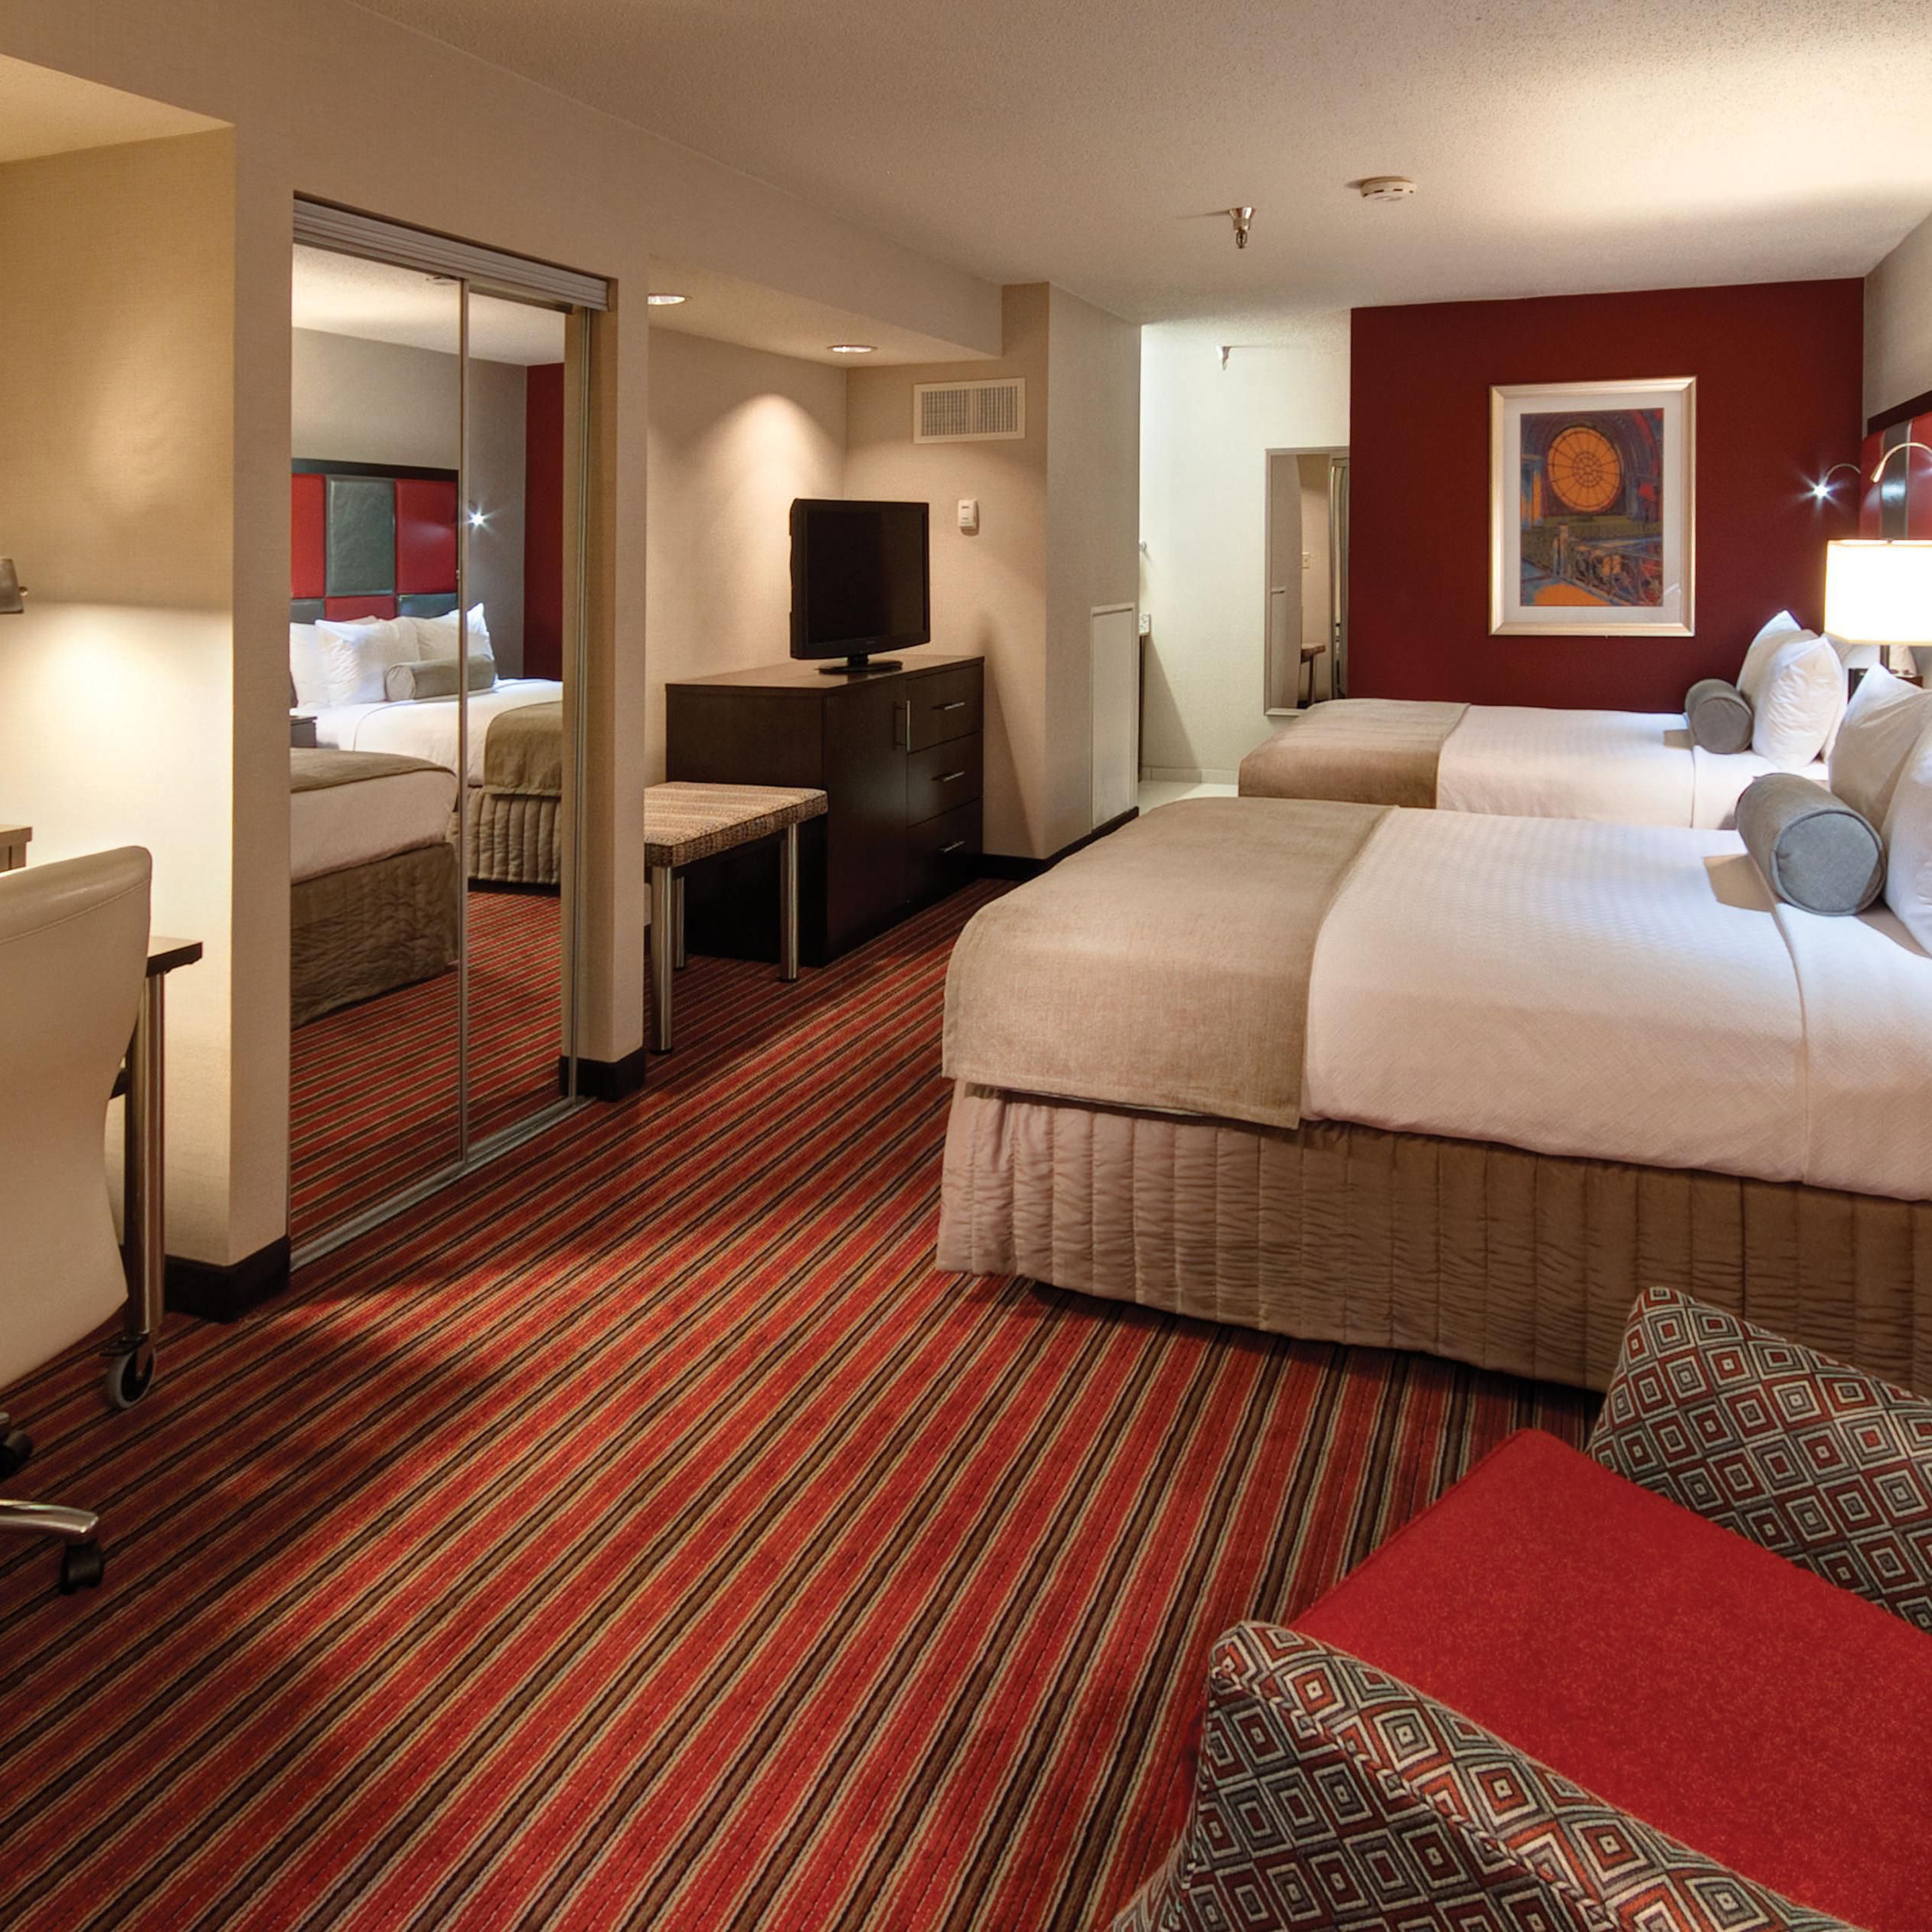 Indulge yourself in our queen superior guest rooms